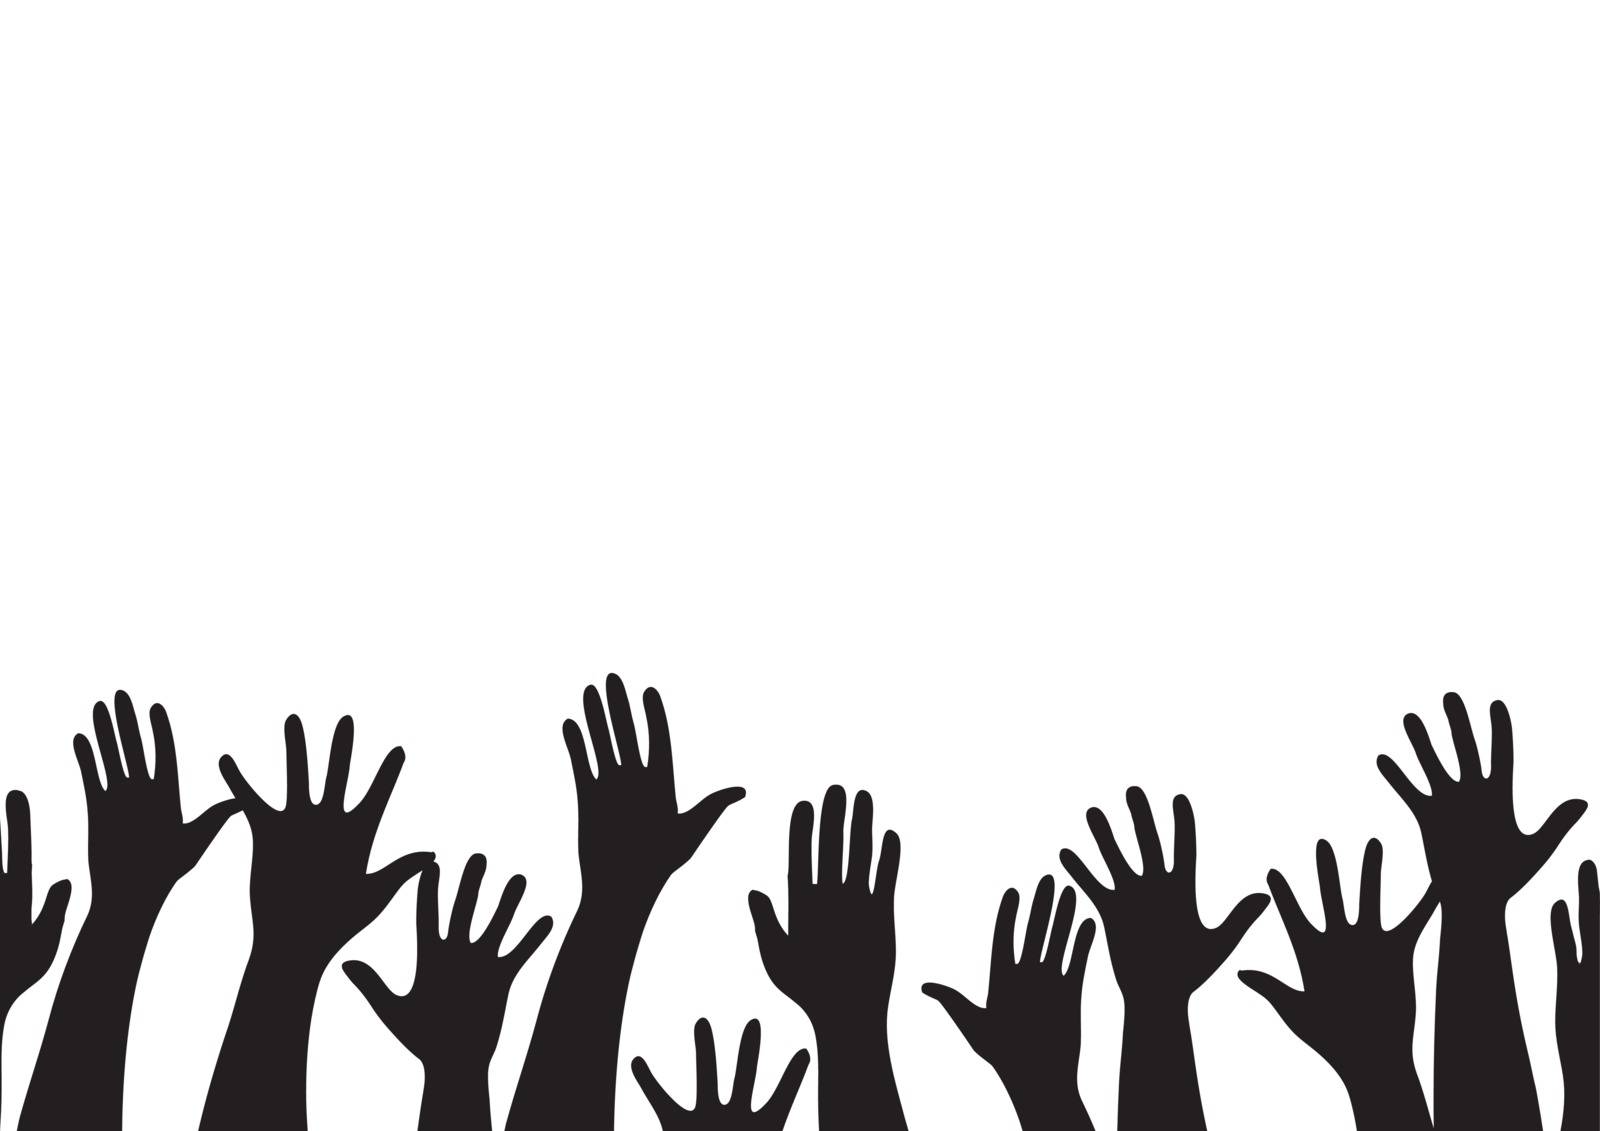 all hands up and background art vector